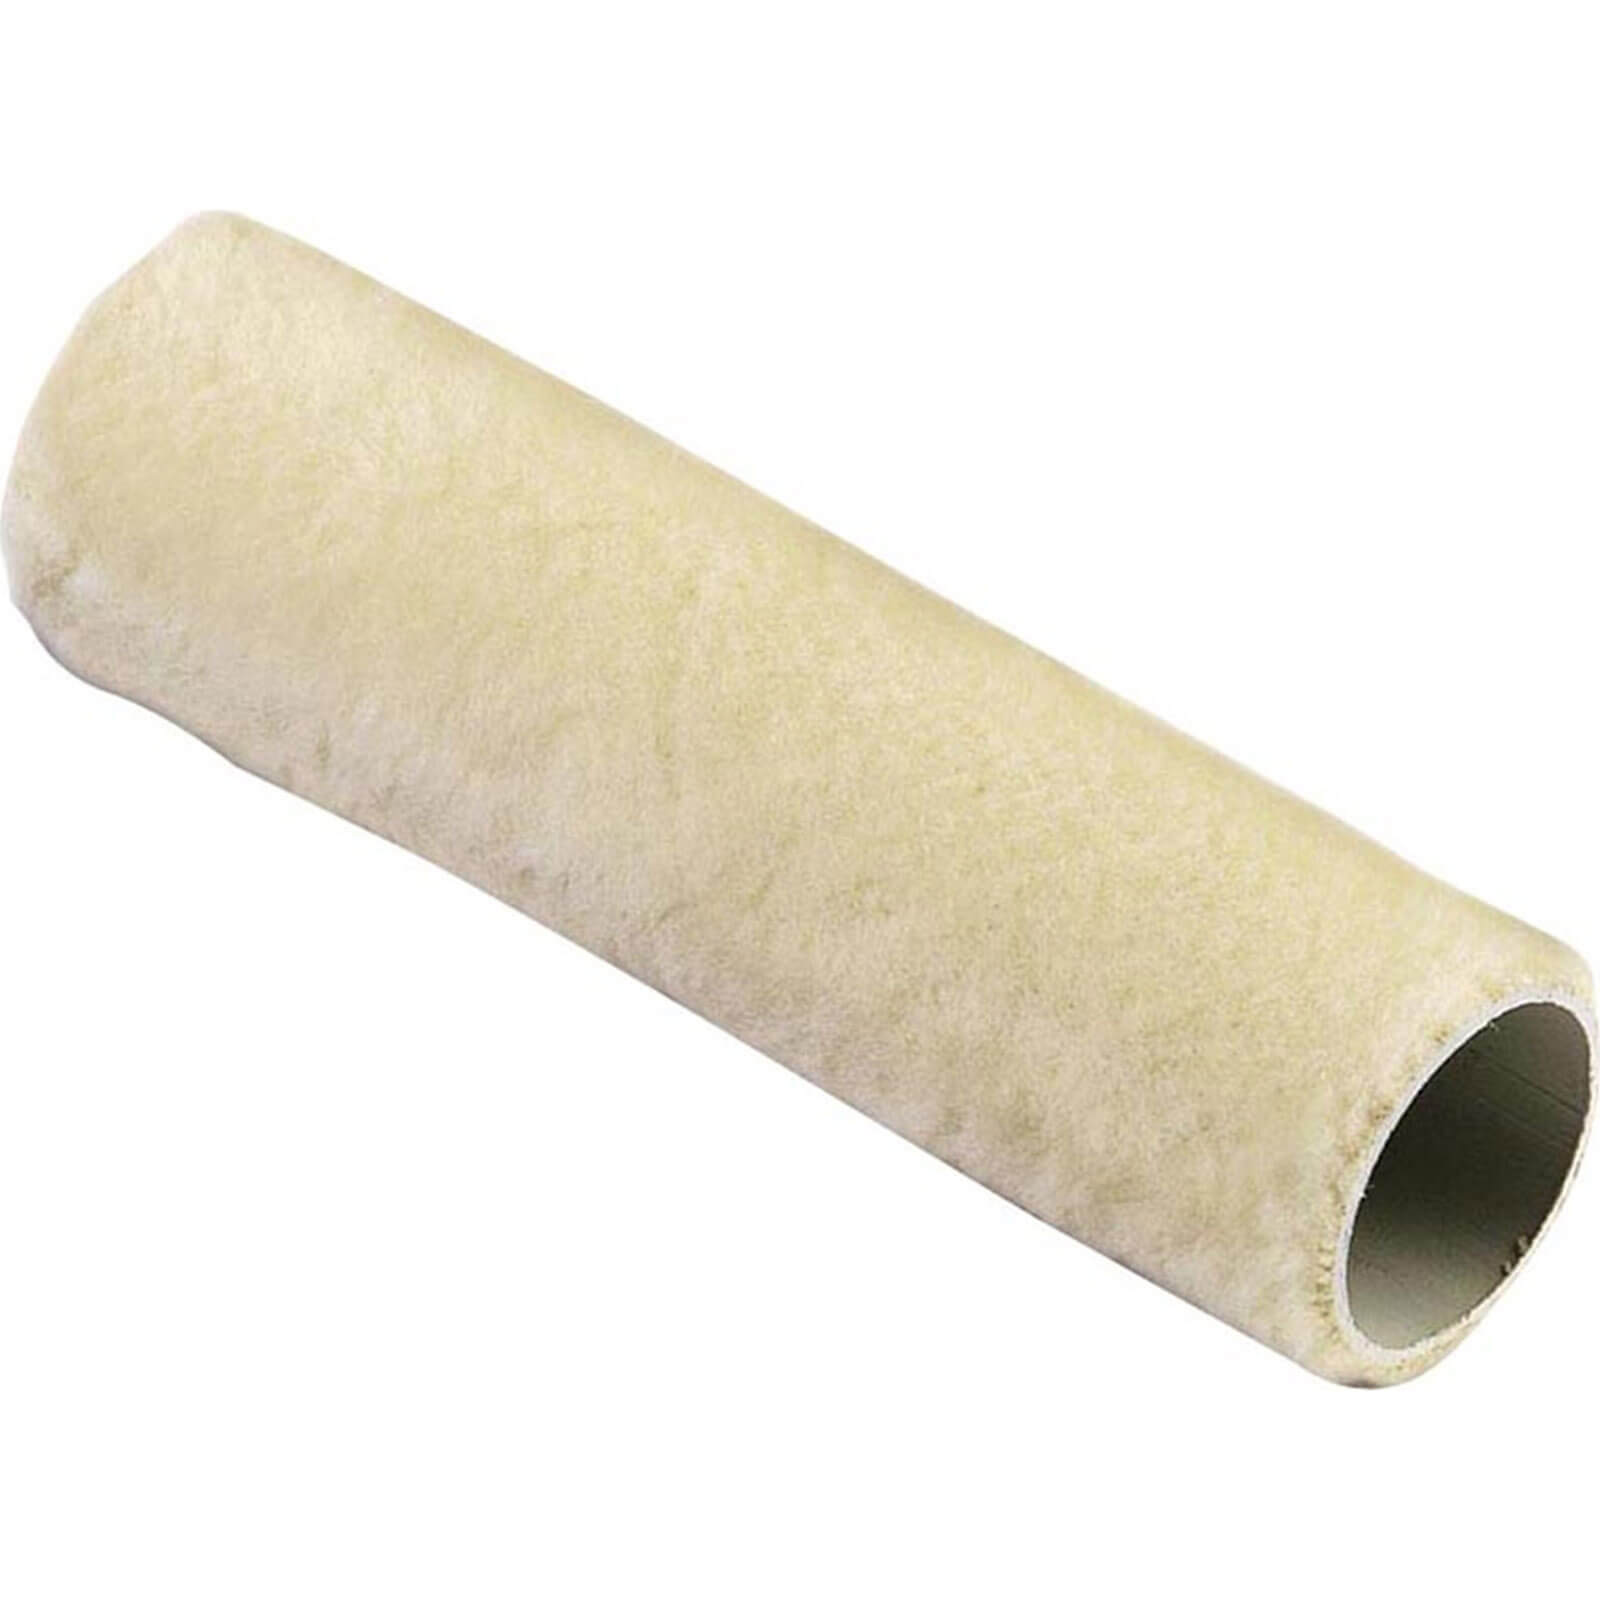 Image of Stanley Short Pile Paint Roller Sleeve 38mm 230mm